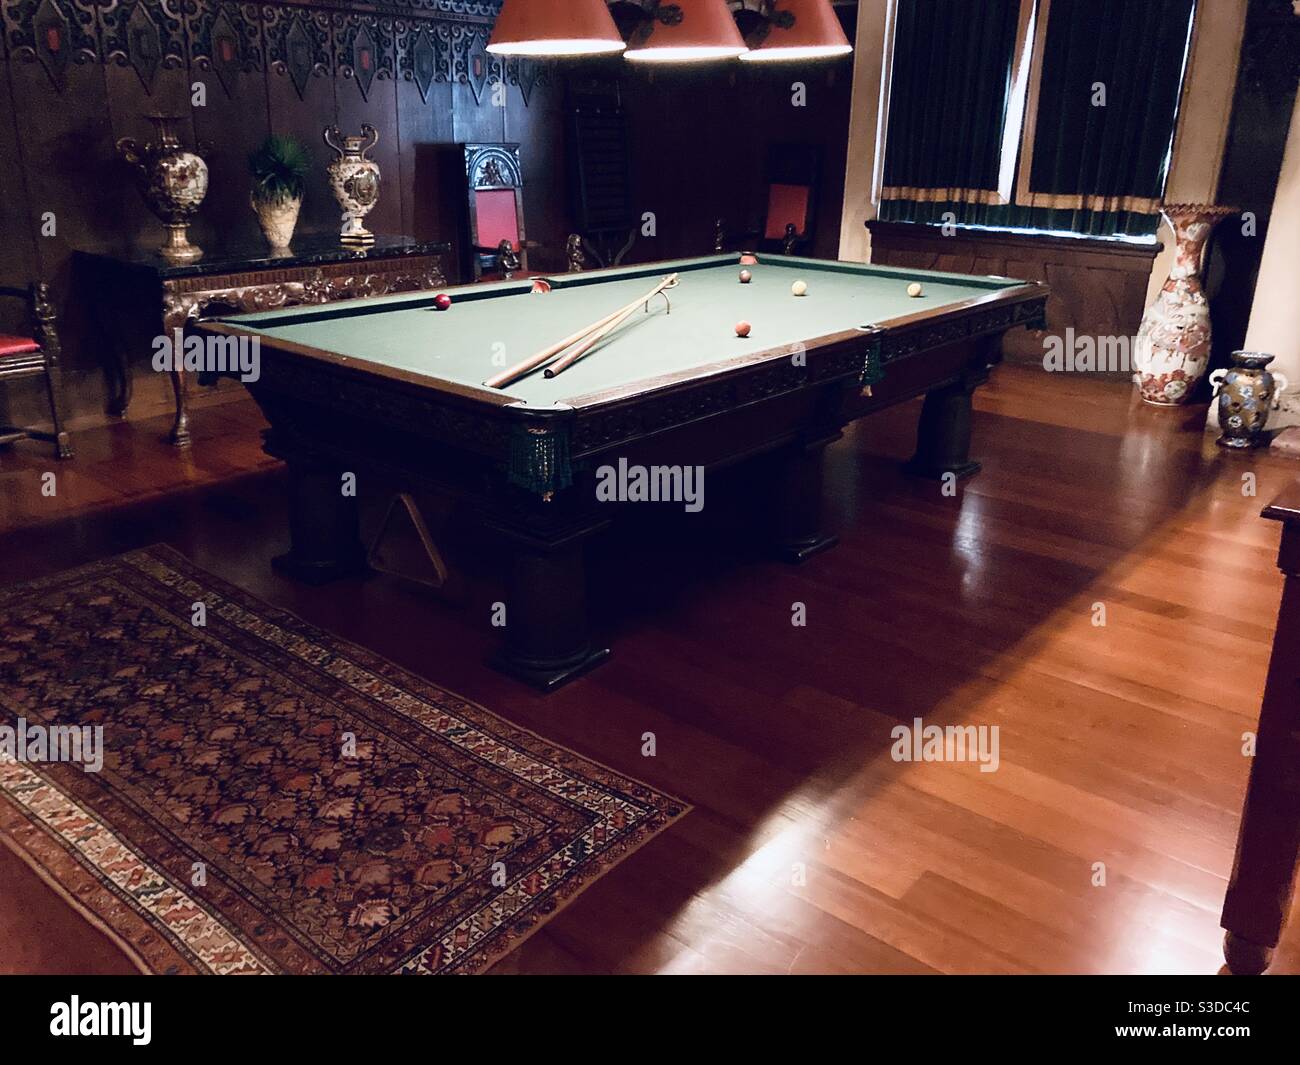 A classic picture of the billiard room a pool table in a dark wood room. Two pool cues on the table along with colored balls ready for a game Stock Photo